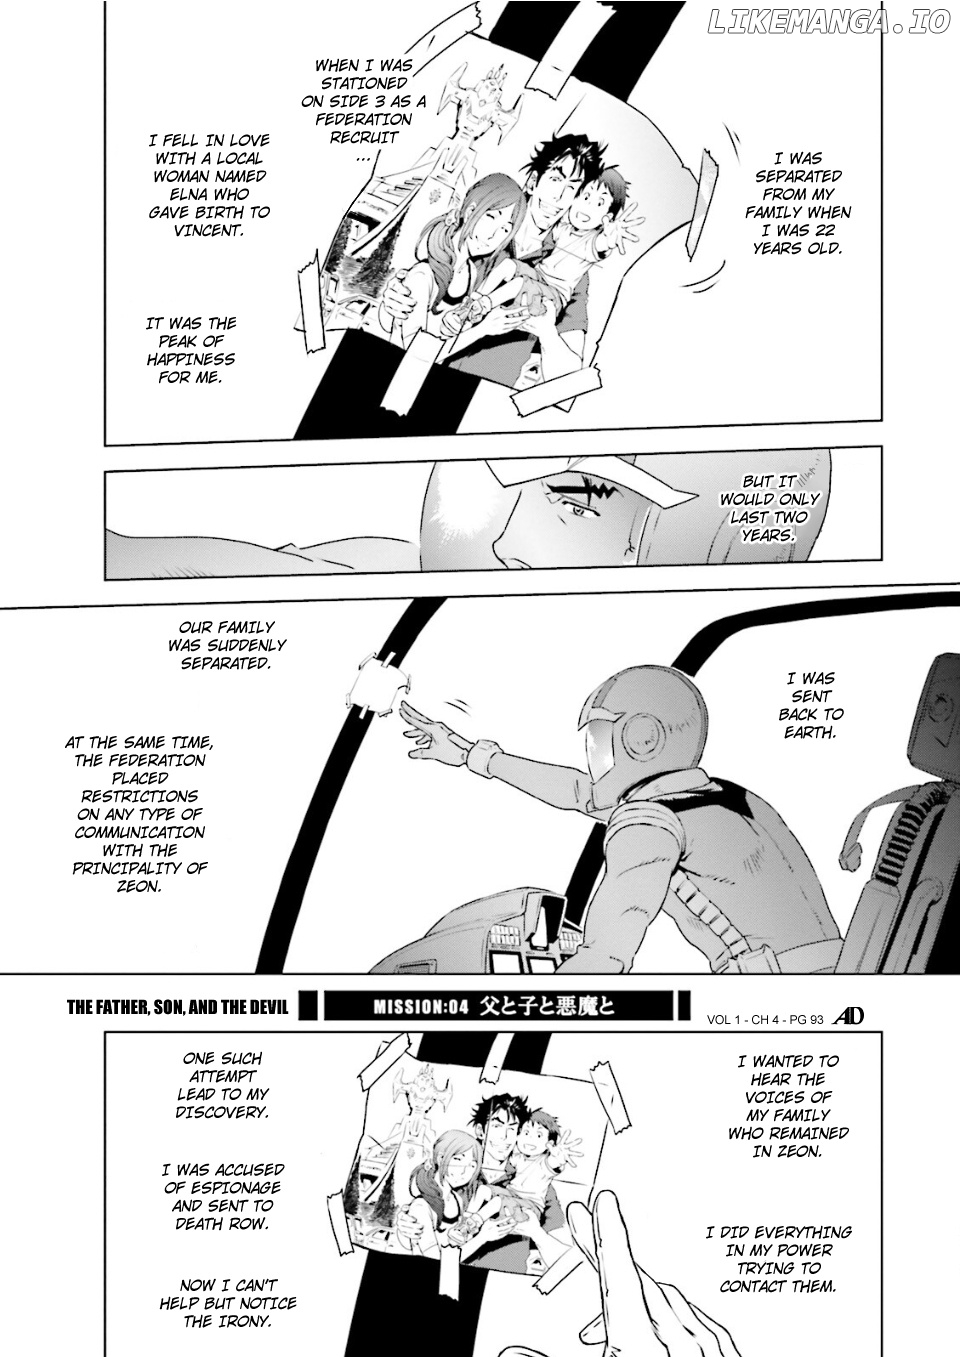 Mobile Suit Gundam Side Story - Missing Link Chapter 4 - page 1